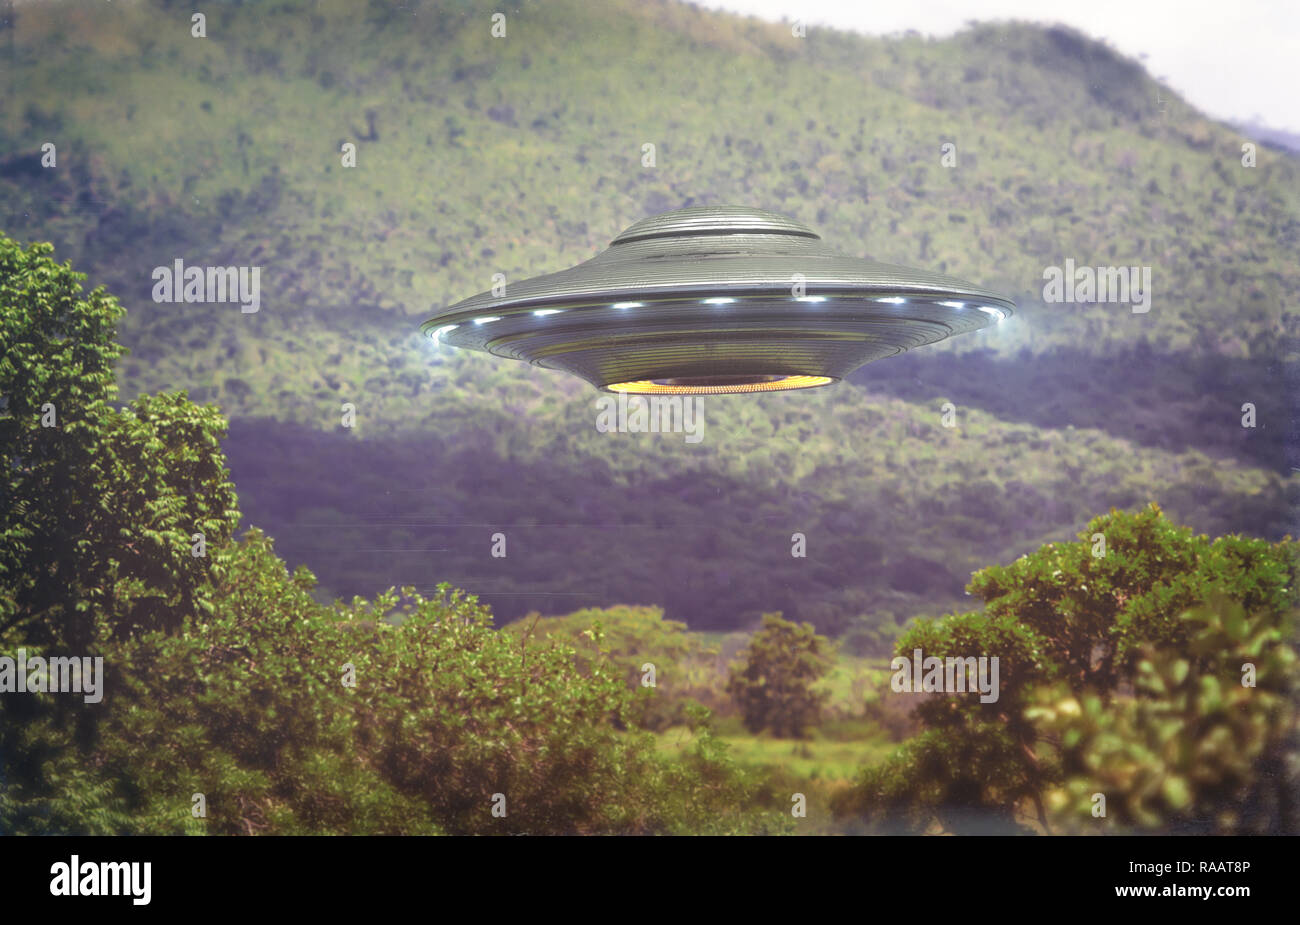 Unidentified flying object over a forest with trees and mountains behind. Old style photo with high ISO noise and dirt with scratches over time. Stock Photo